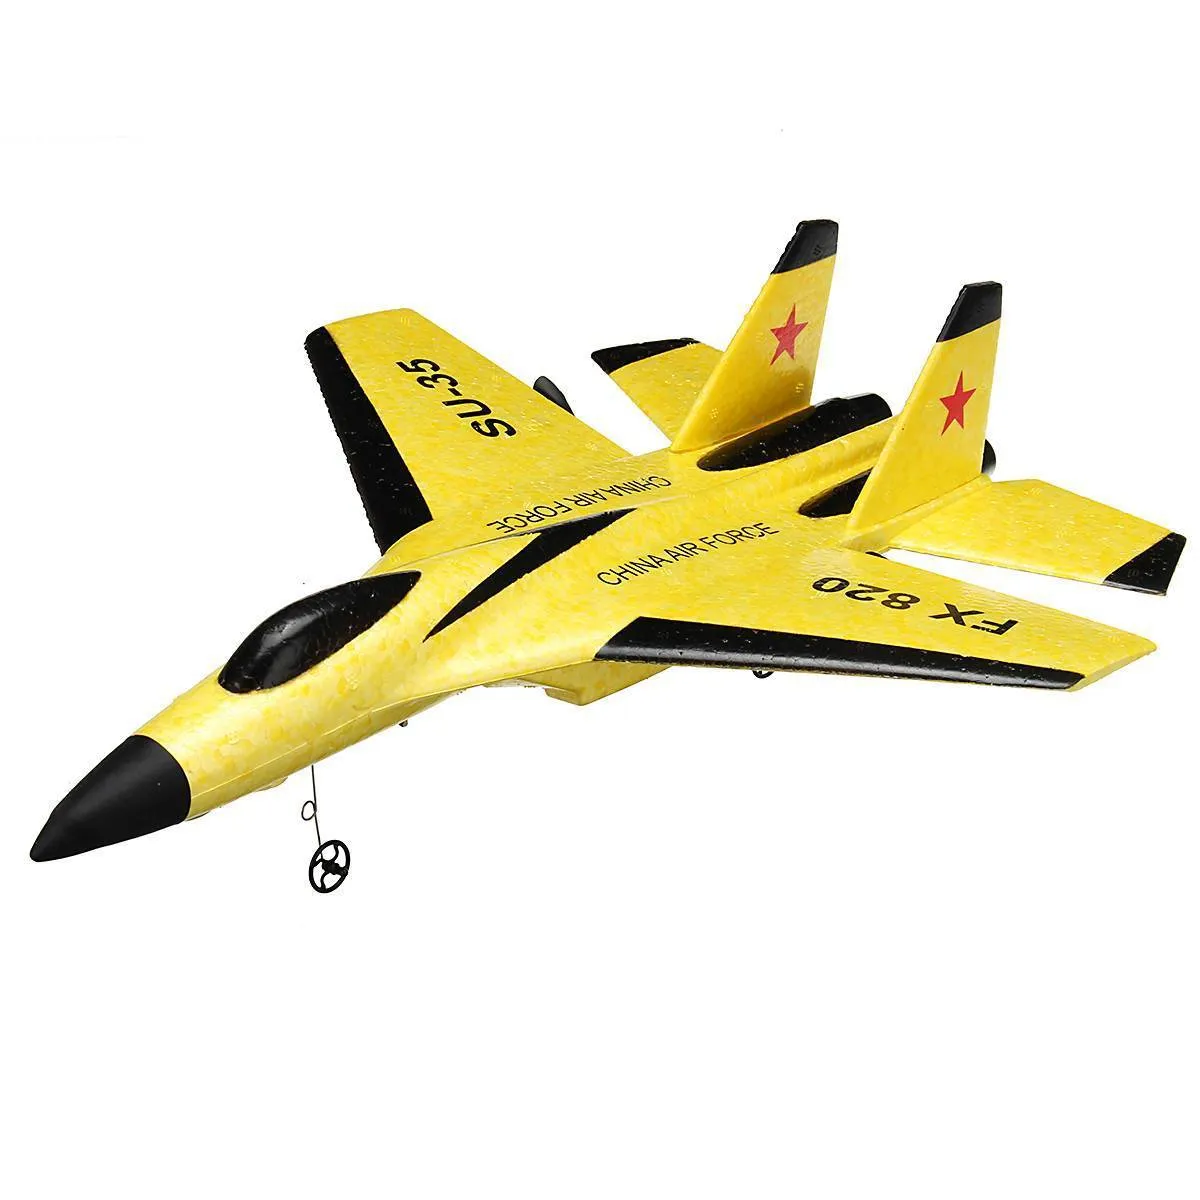 RC Plane Toy EPP Craft Foam Electric Outdoor RTF Radio Remote Control SU35 Tail Pusher Quadcopter Glider Airplane Model for Boy Y1794241